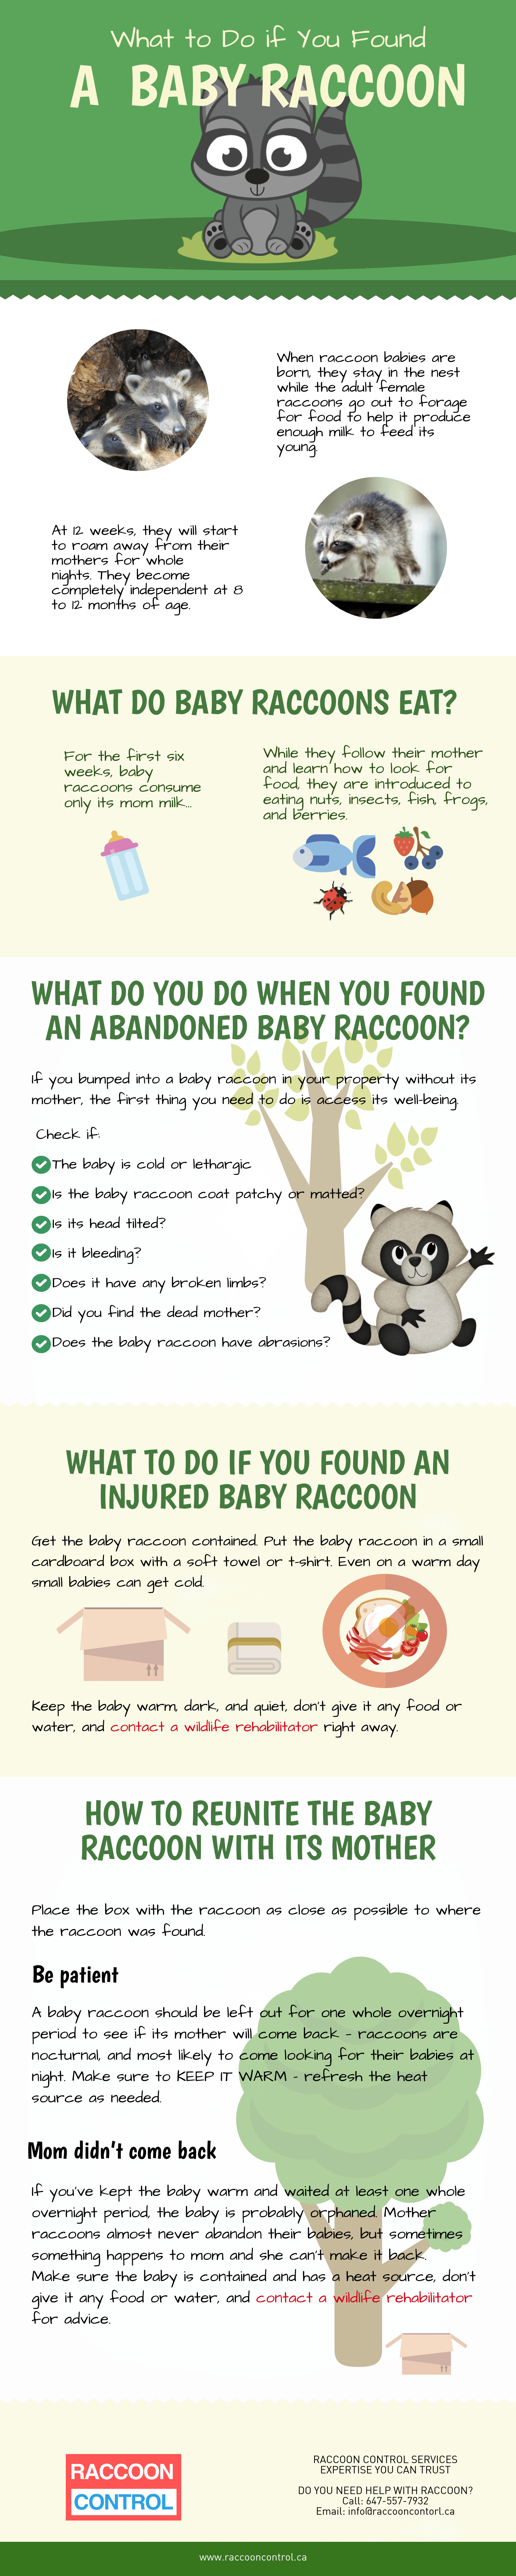 what to do if you found a baby raccoon infographic